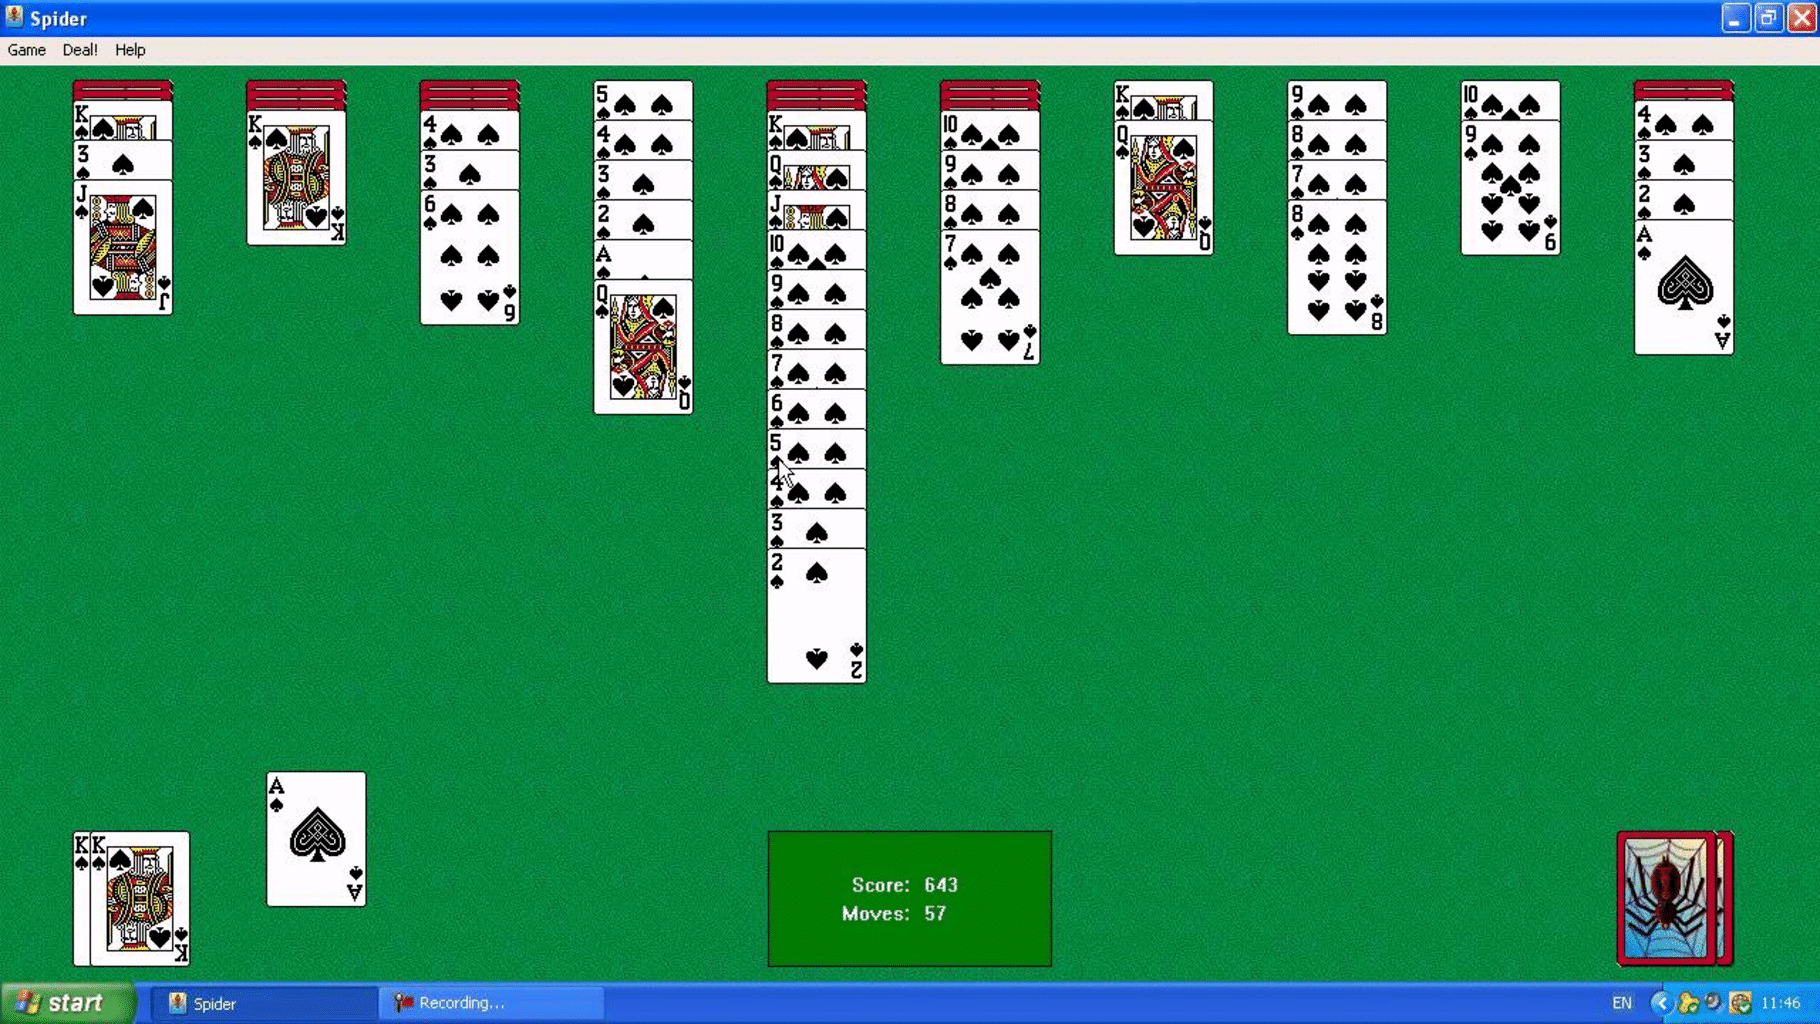 free download spider solitaire for windows 10